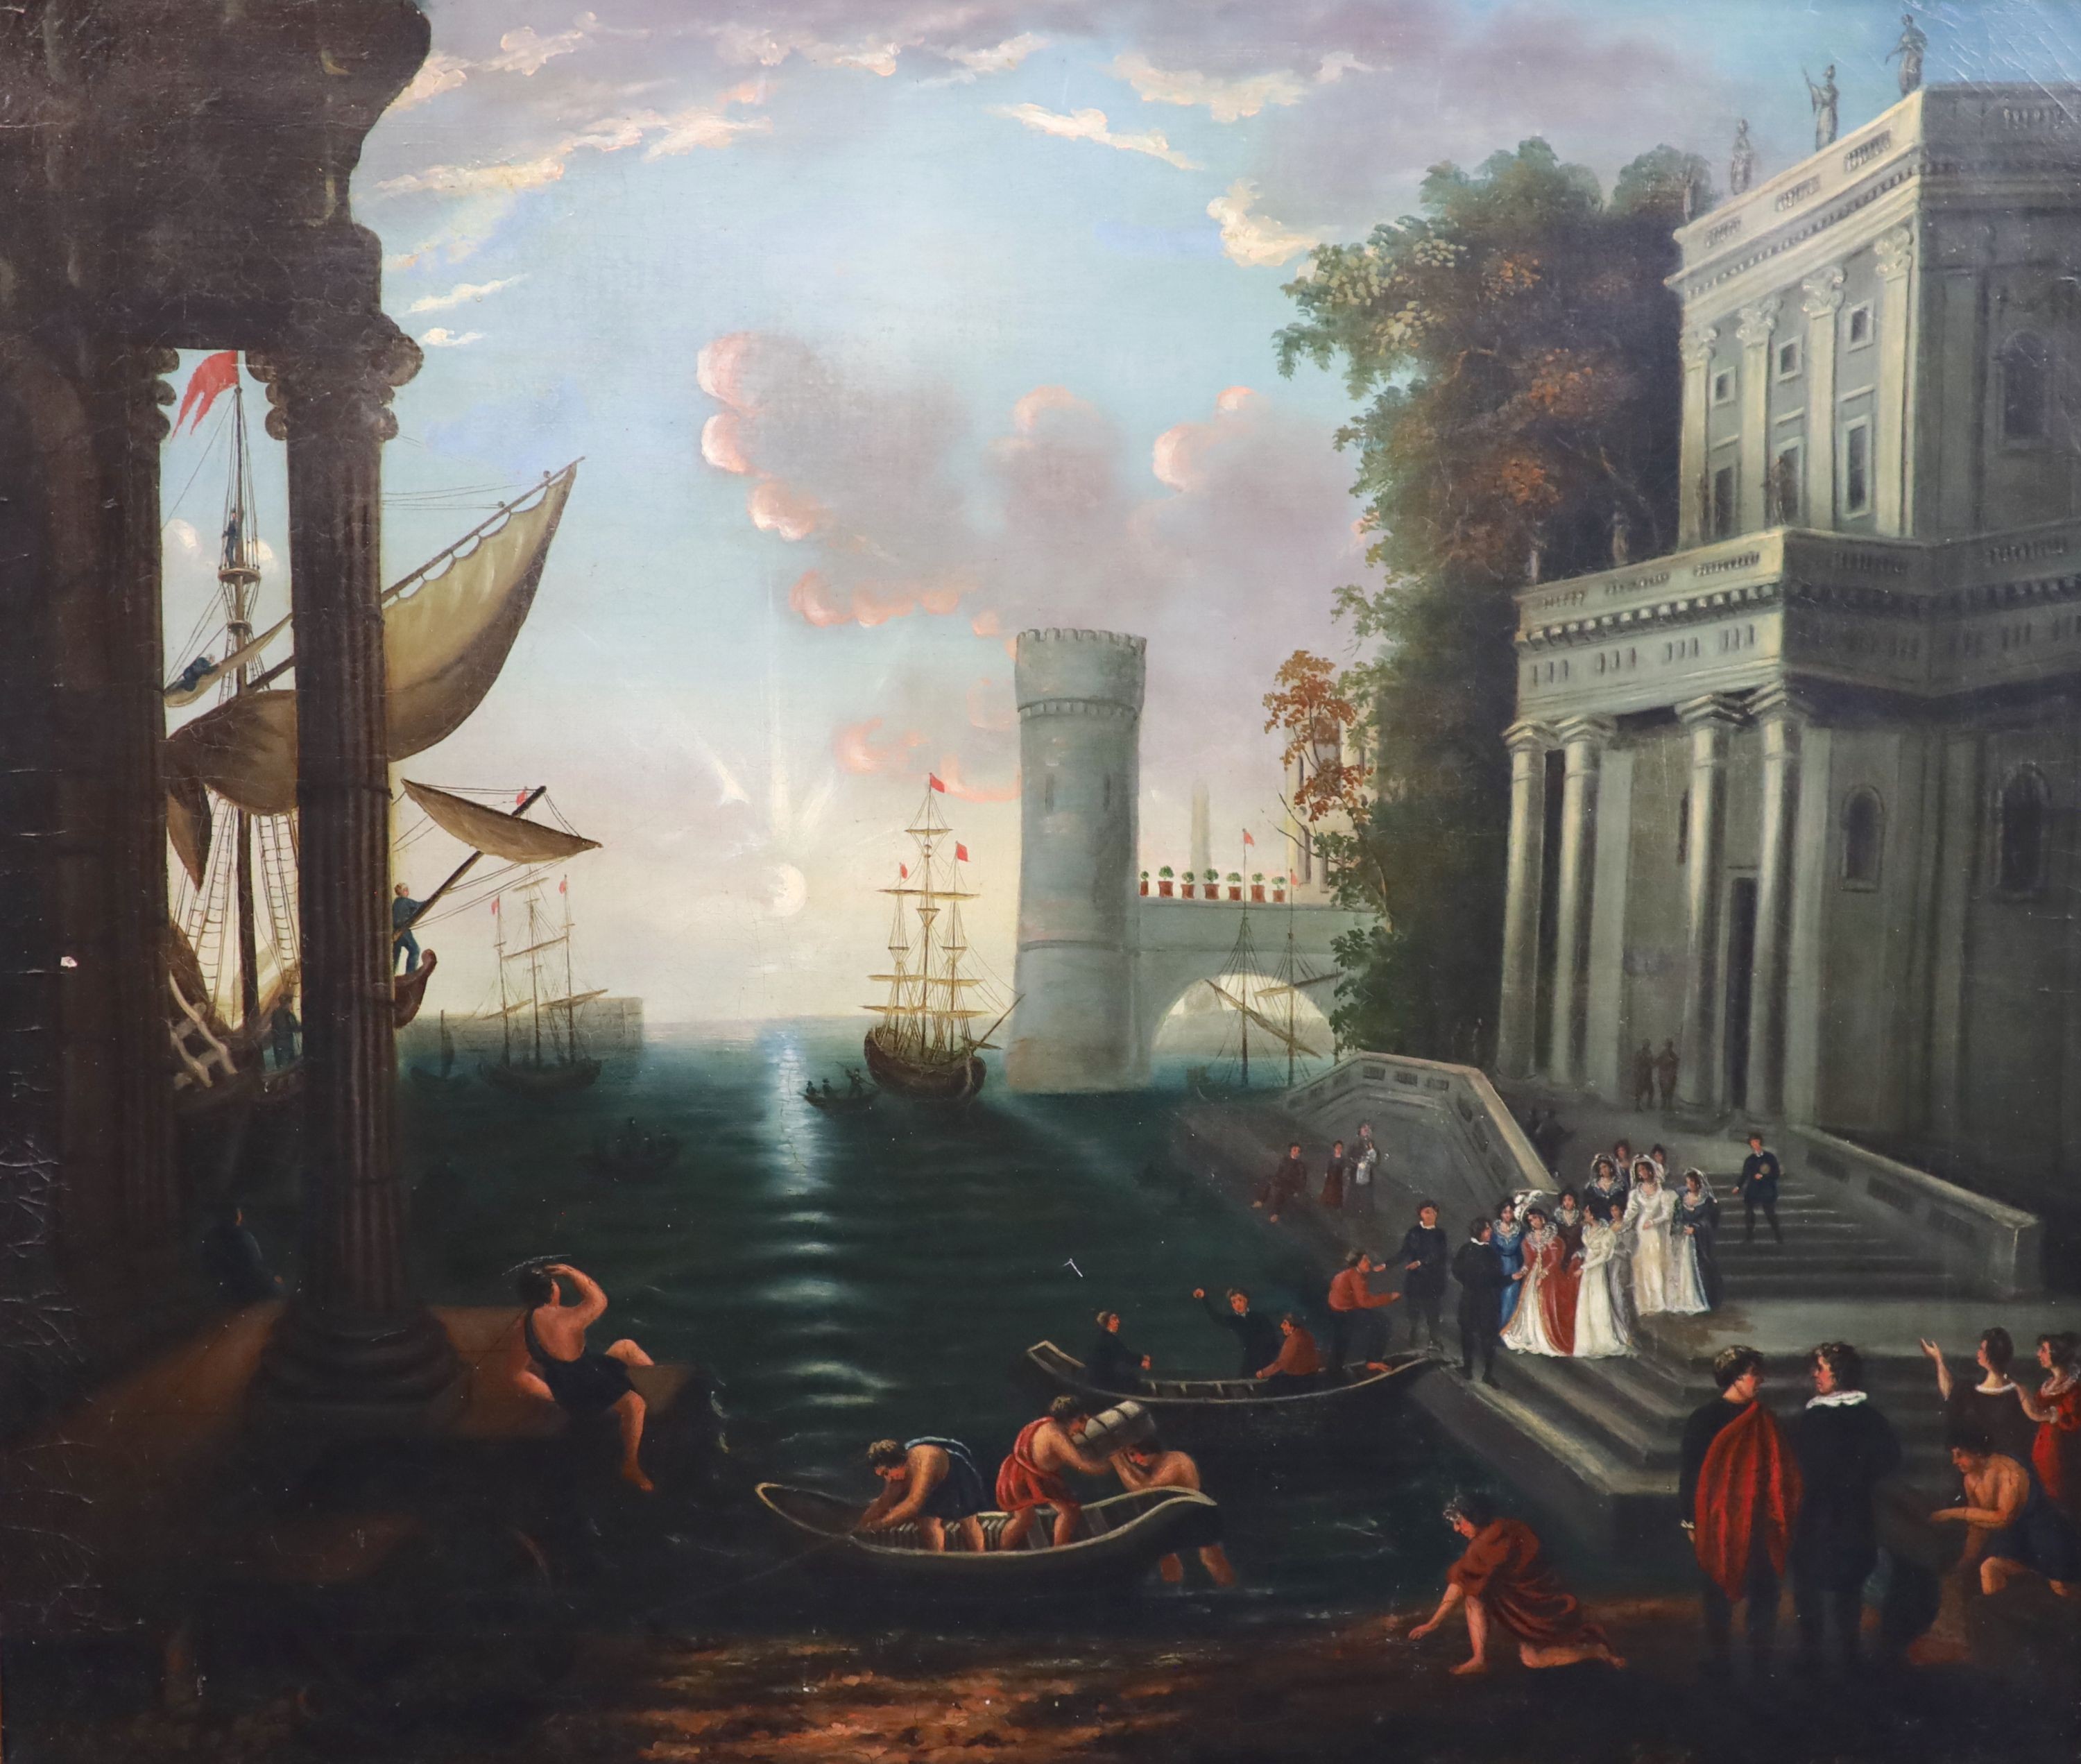 Italian School, follower of Claude Lorrain (French, 1600-1682), The Embarkation of the Queen of Sheba, oil on canvas, 66 x 76cm